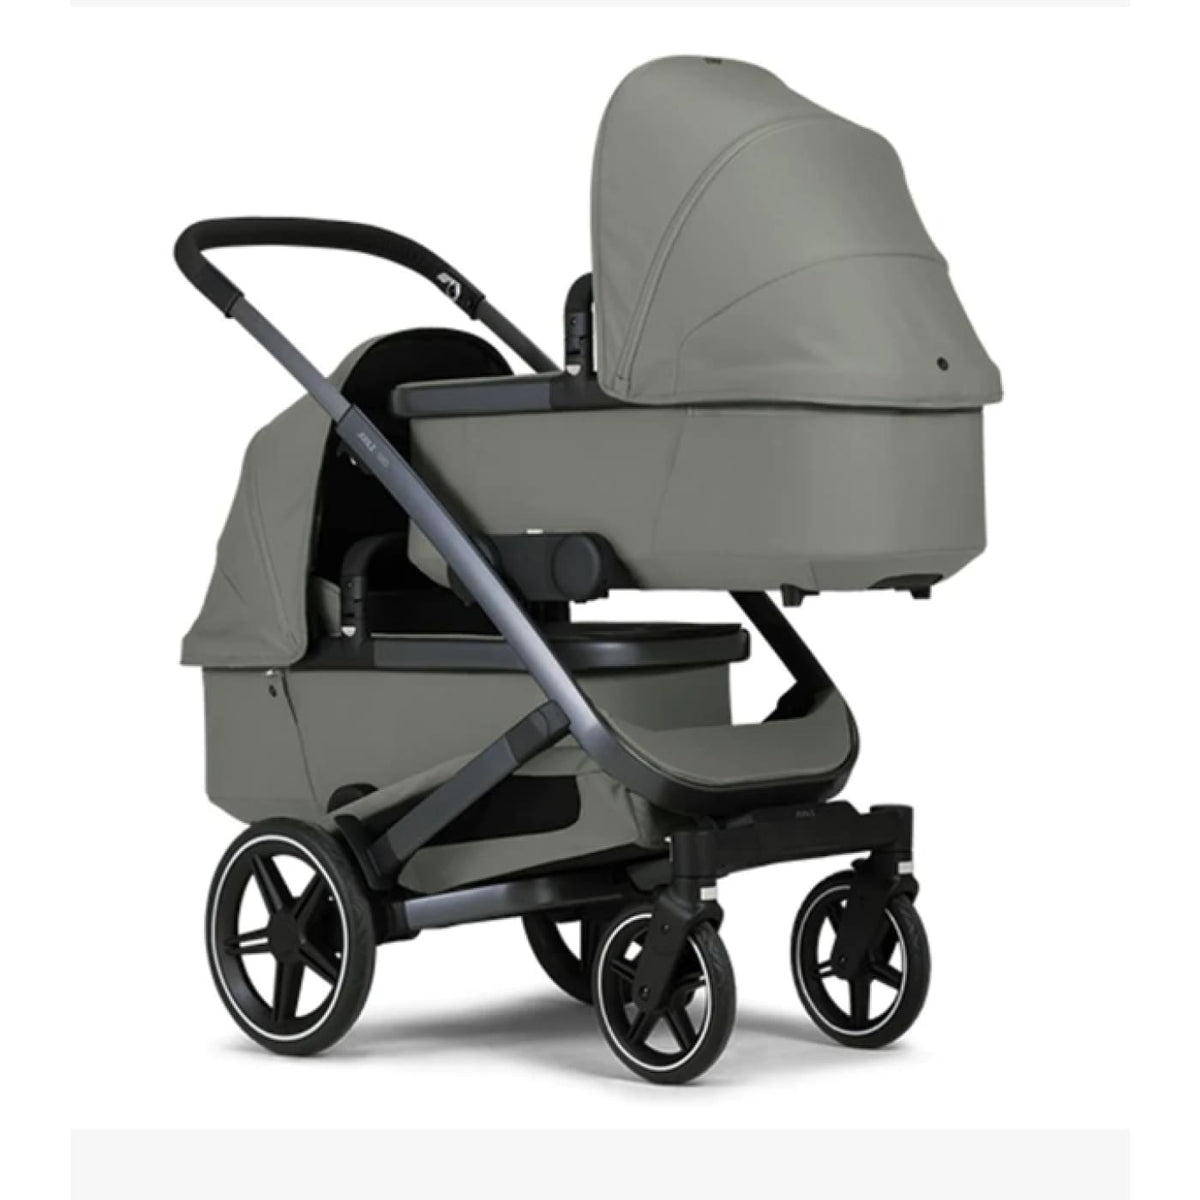 Joolz Geo3 Carry Cot - Sage Green - PRAMS &amp; STROLLERS - BASS/CARRY COTS/STANDS